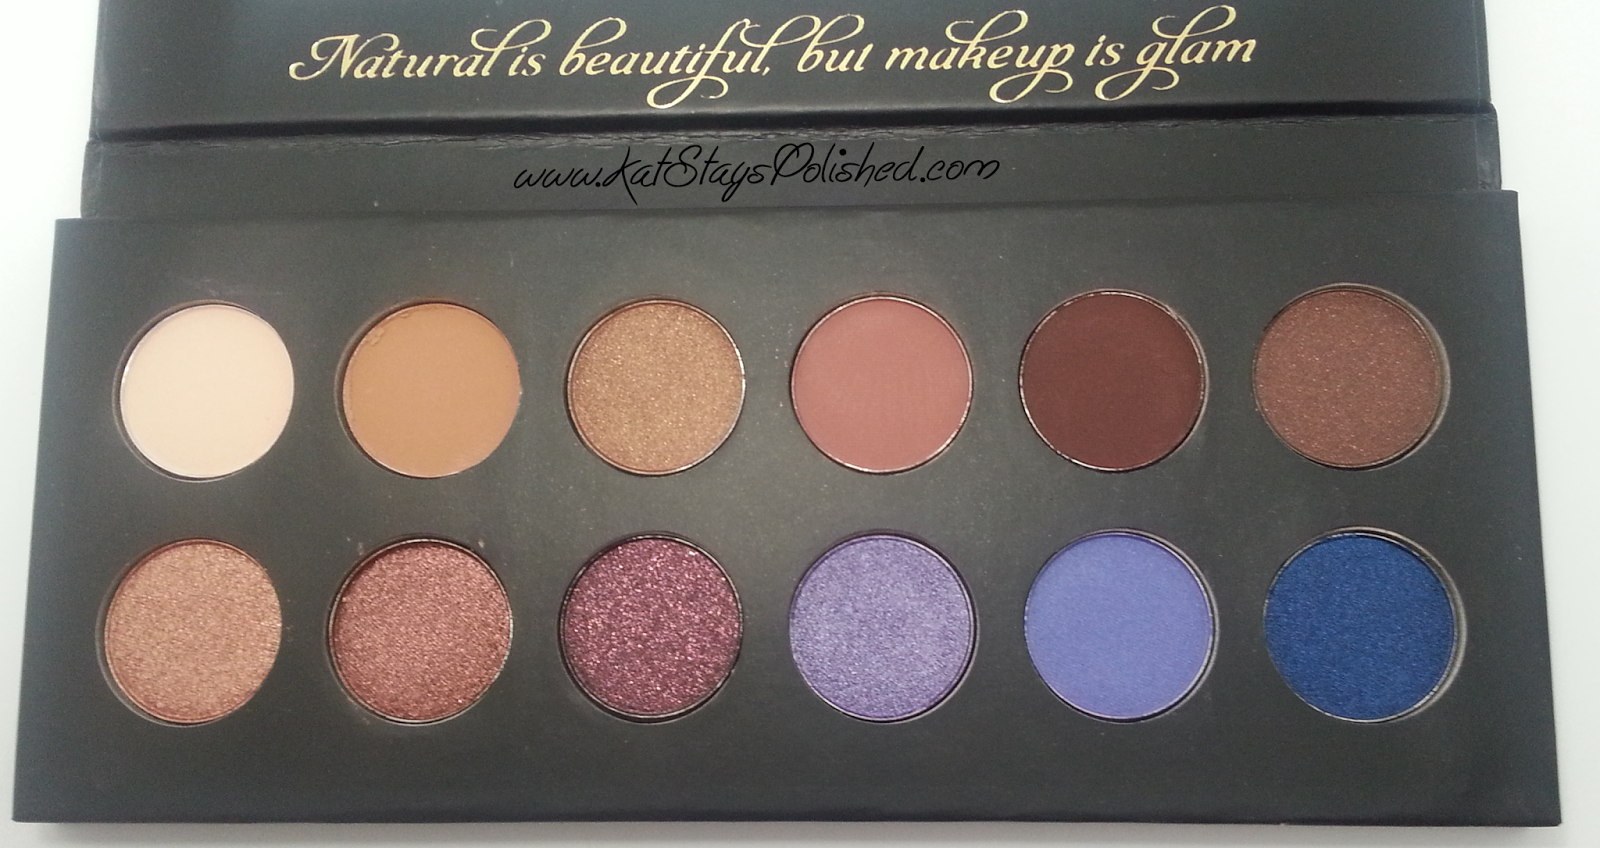 bh cosmetics | It's Judy Time Palette | Kat Stays Polished